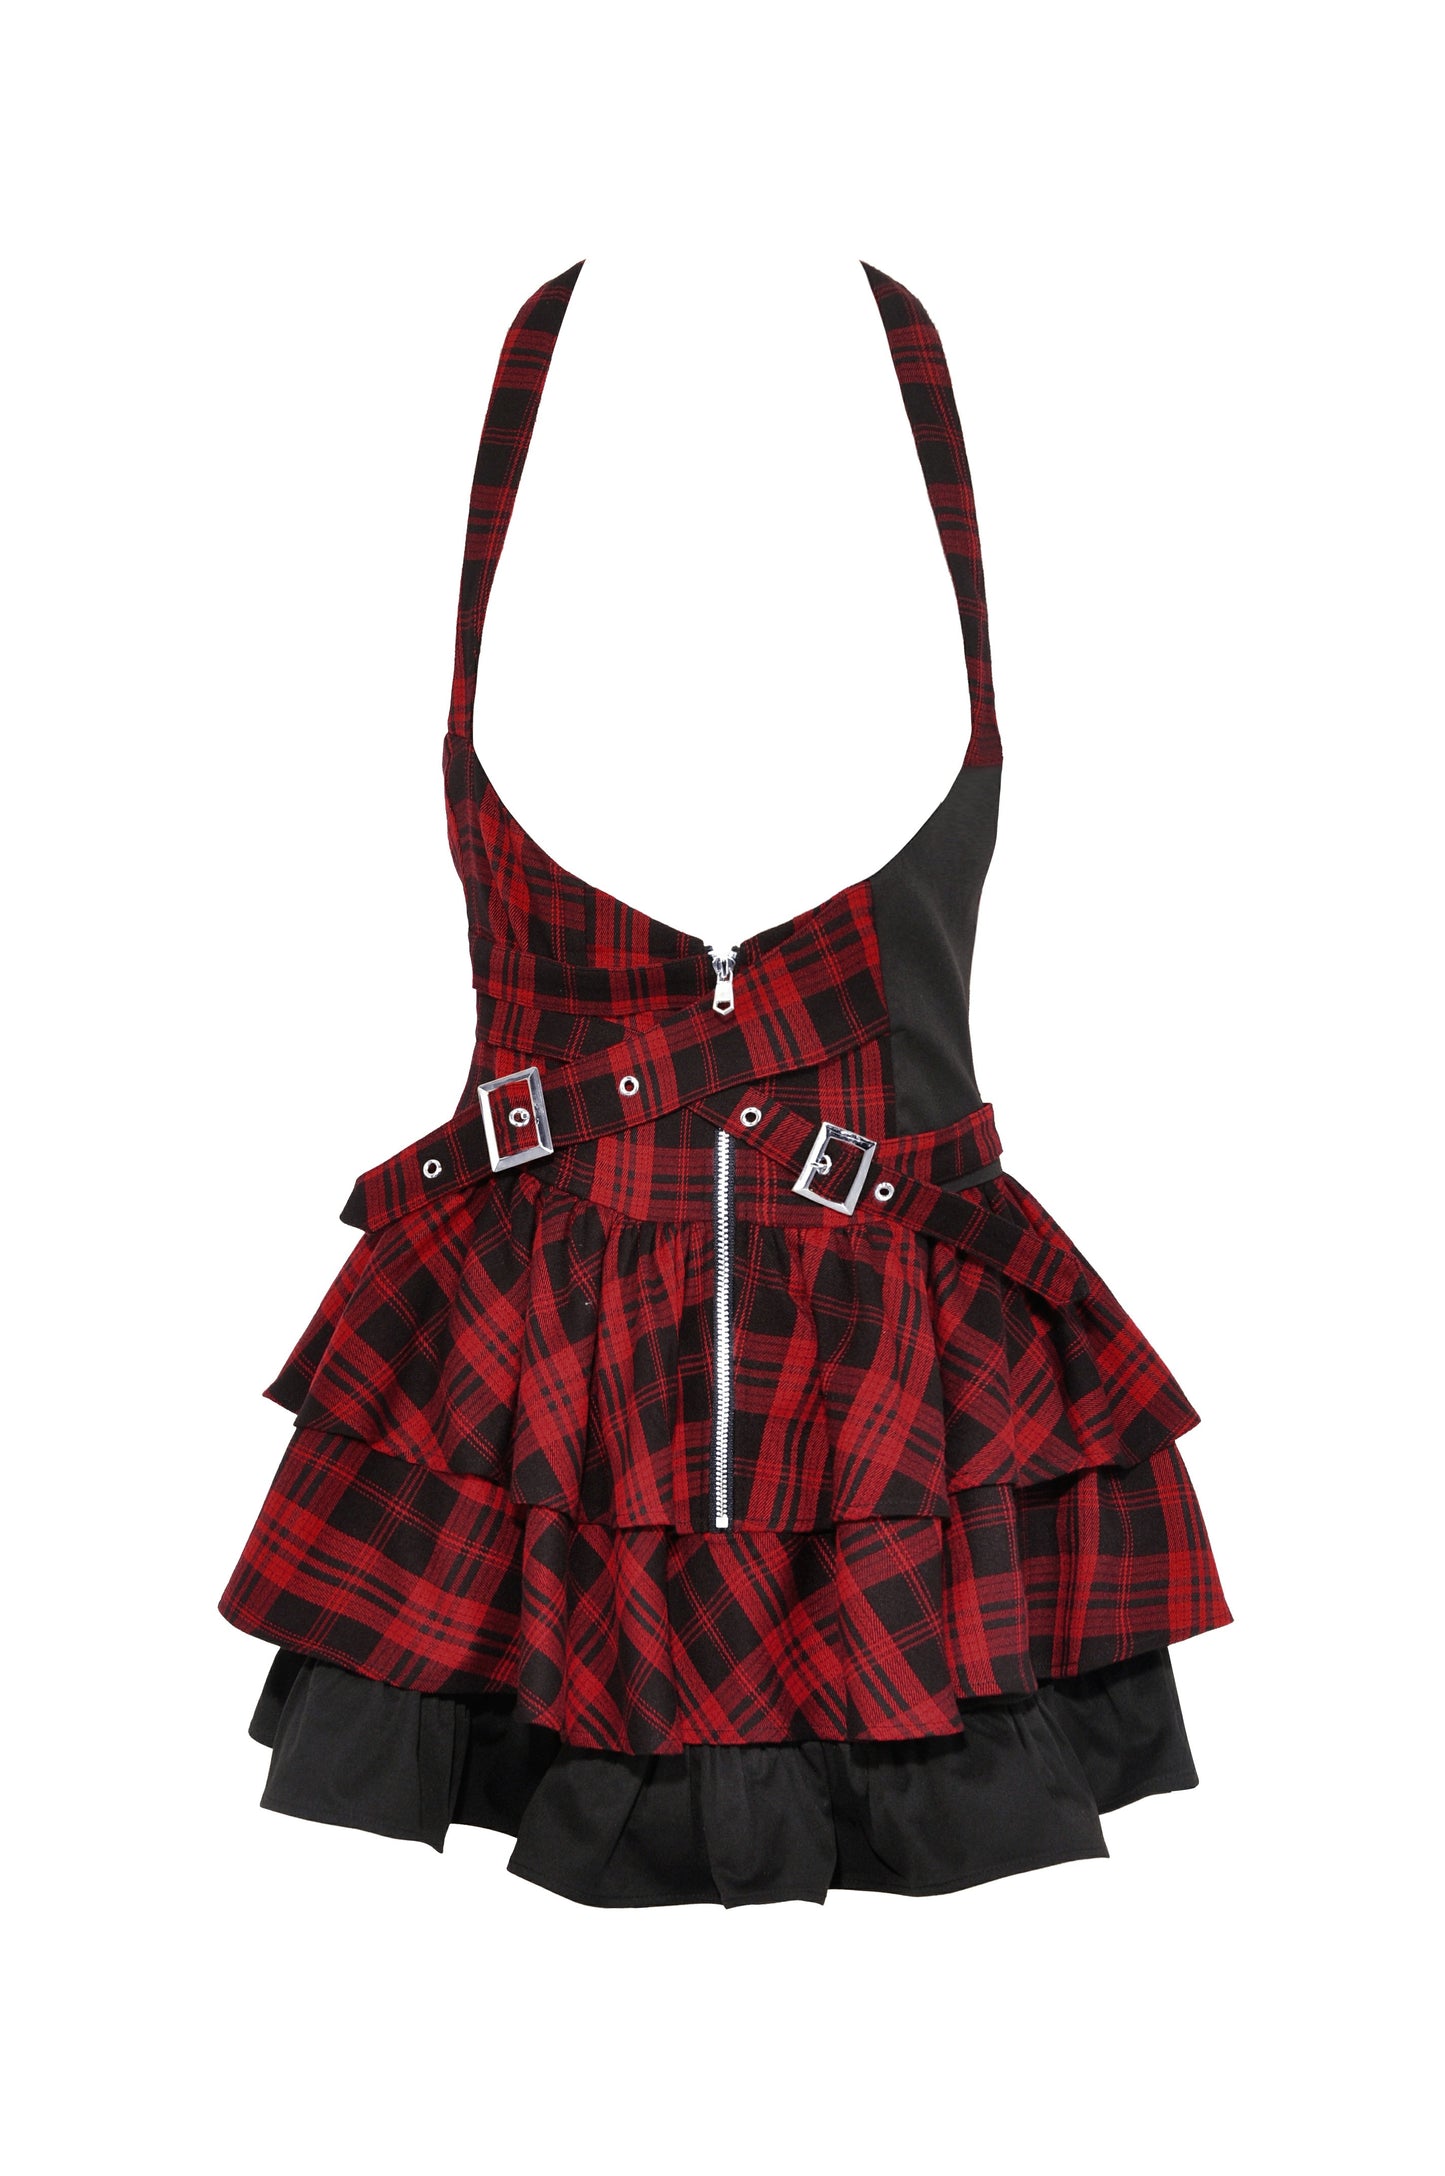 We Are The Freaks Red Plaid Frilly Halter Dress by Dark In Love